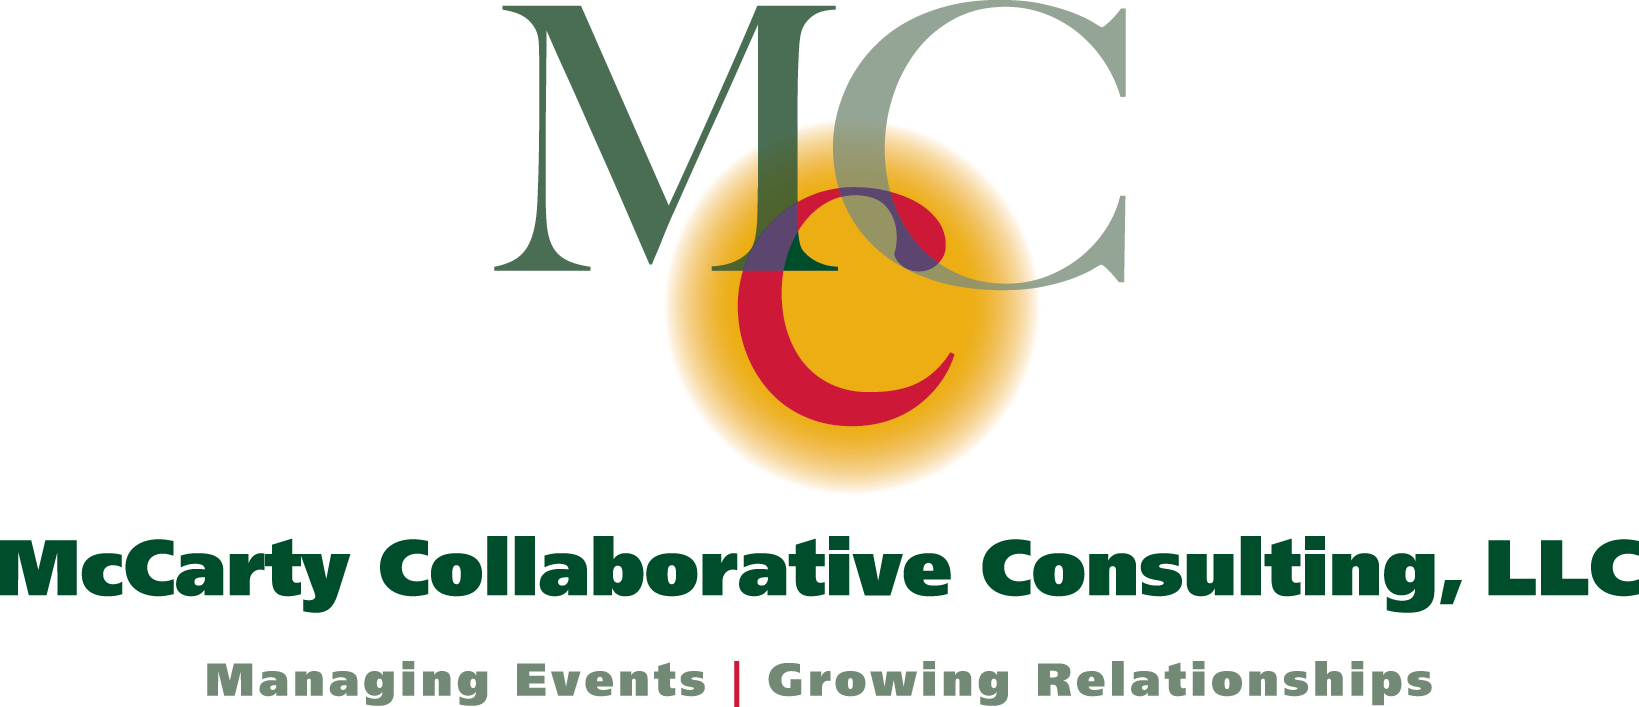 McCarty Collaborative Consulting full color logo